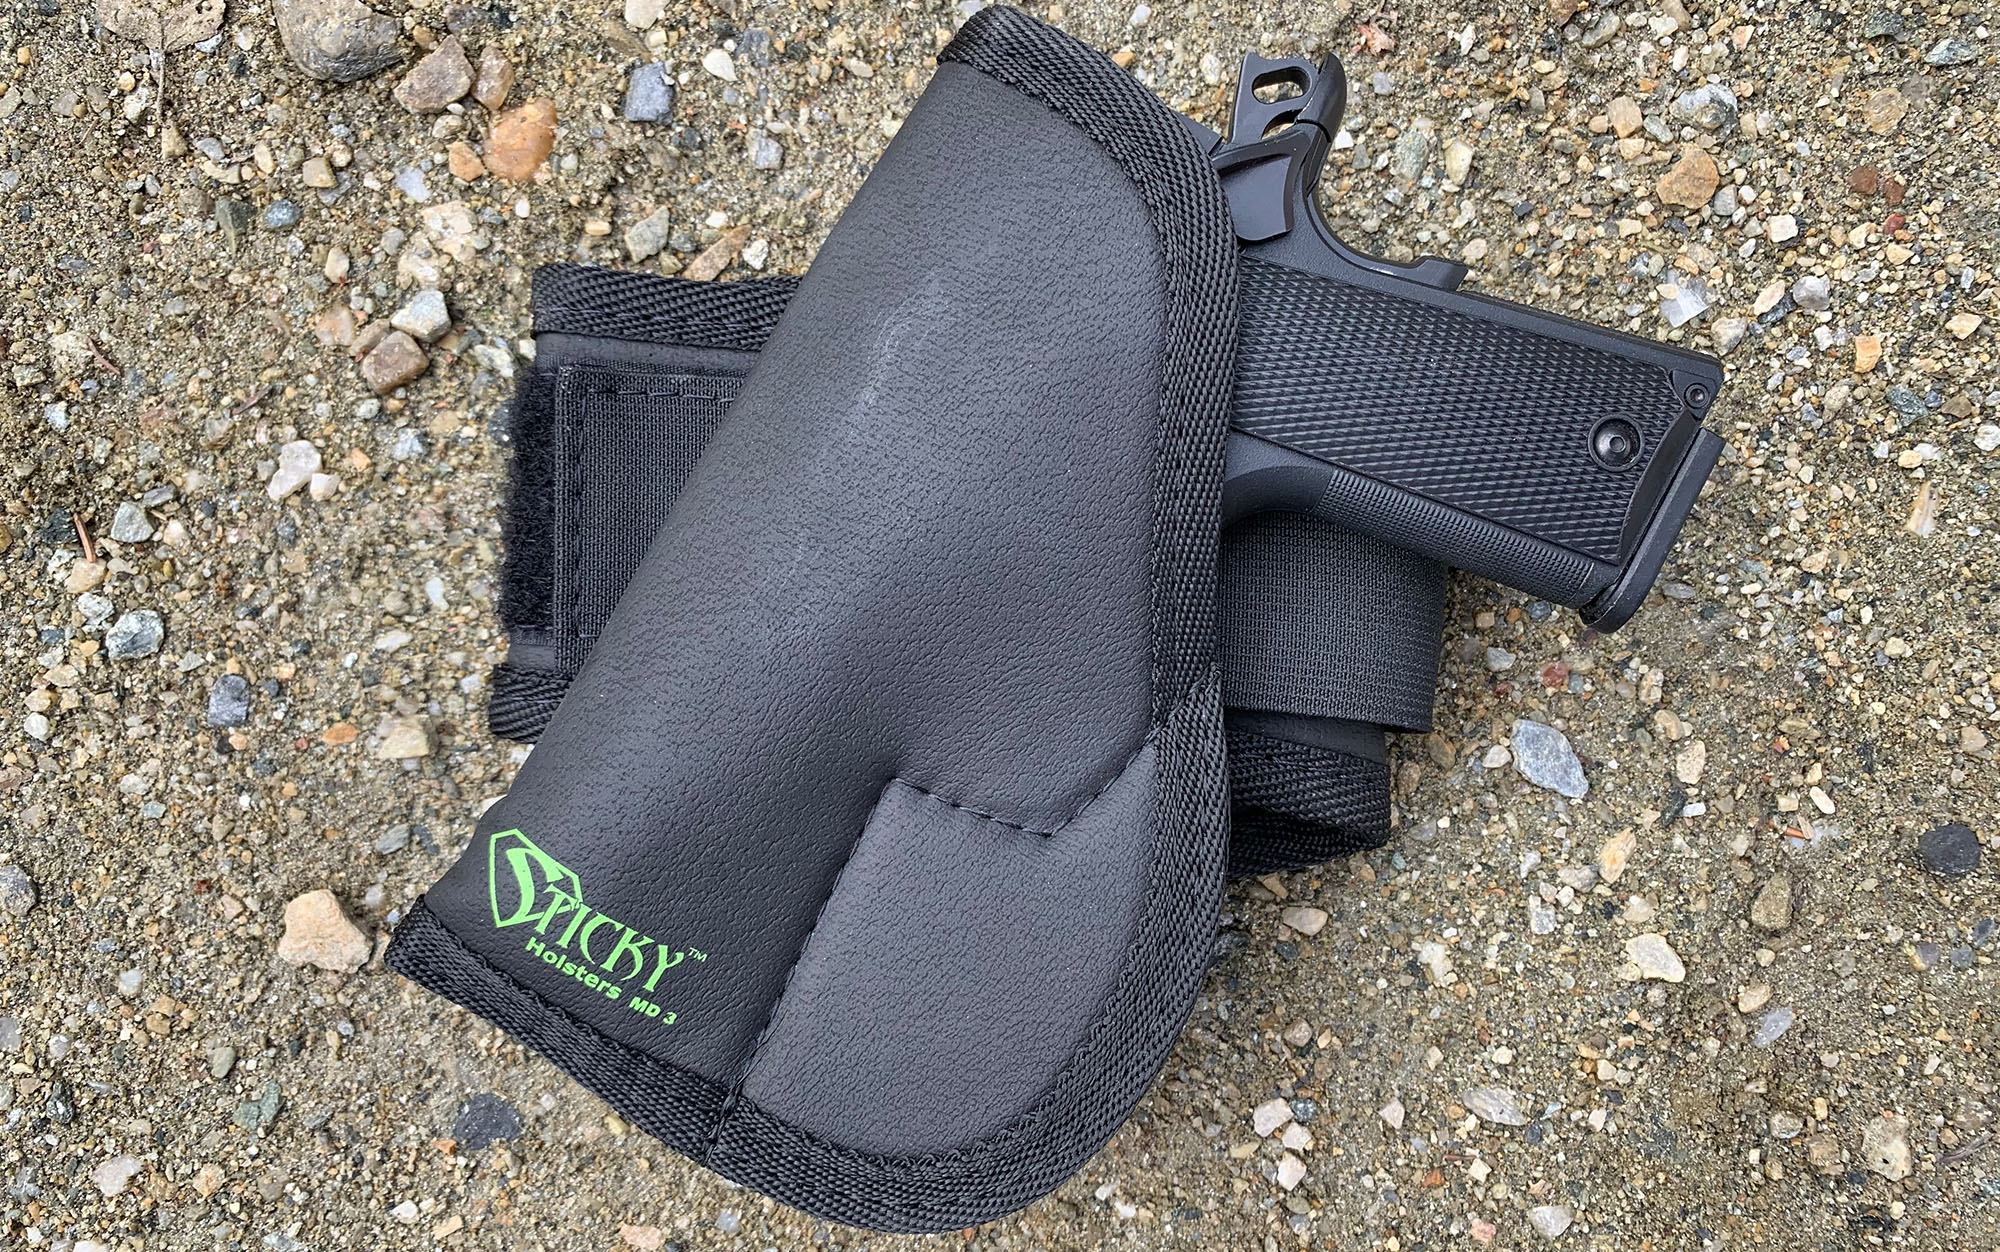 The Sticky Holsters Ankle Biter Wrap and Concealed Carry Holster are great.